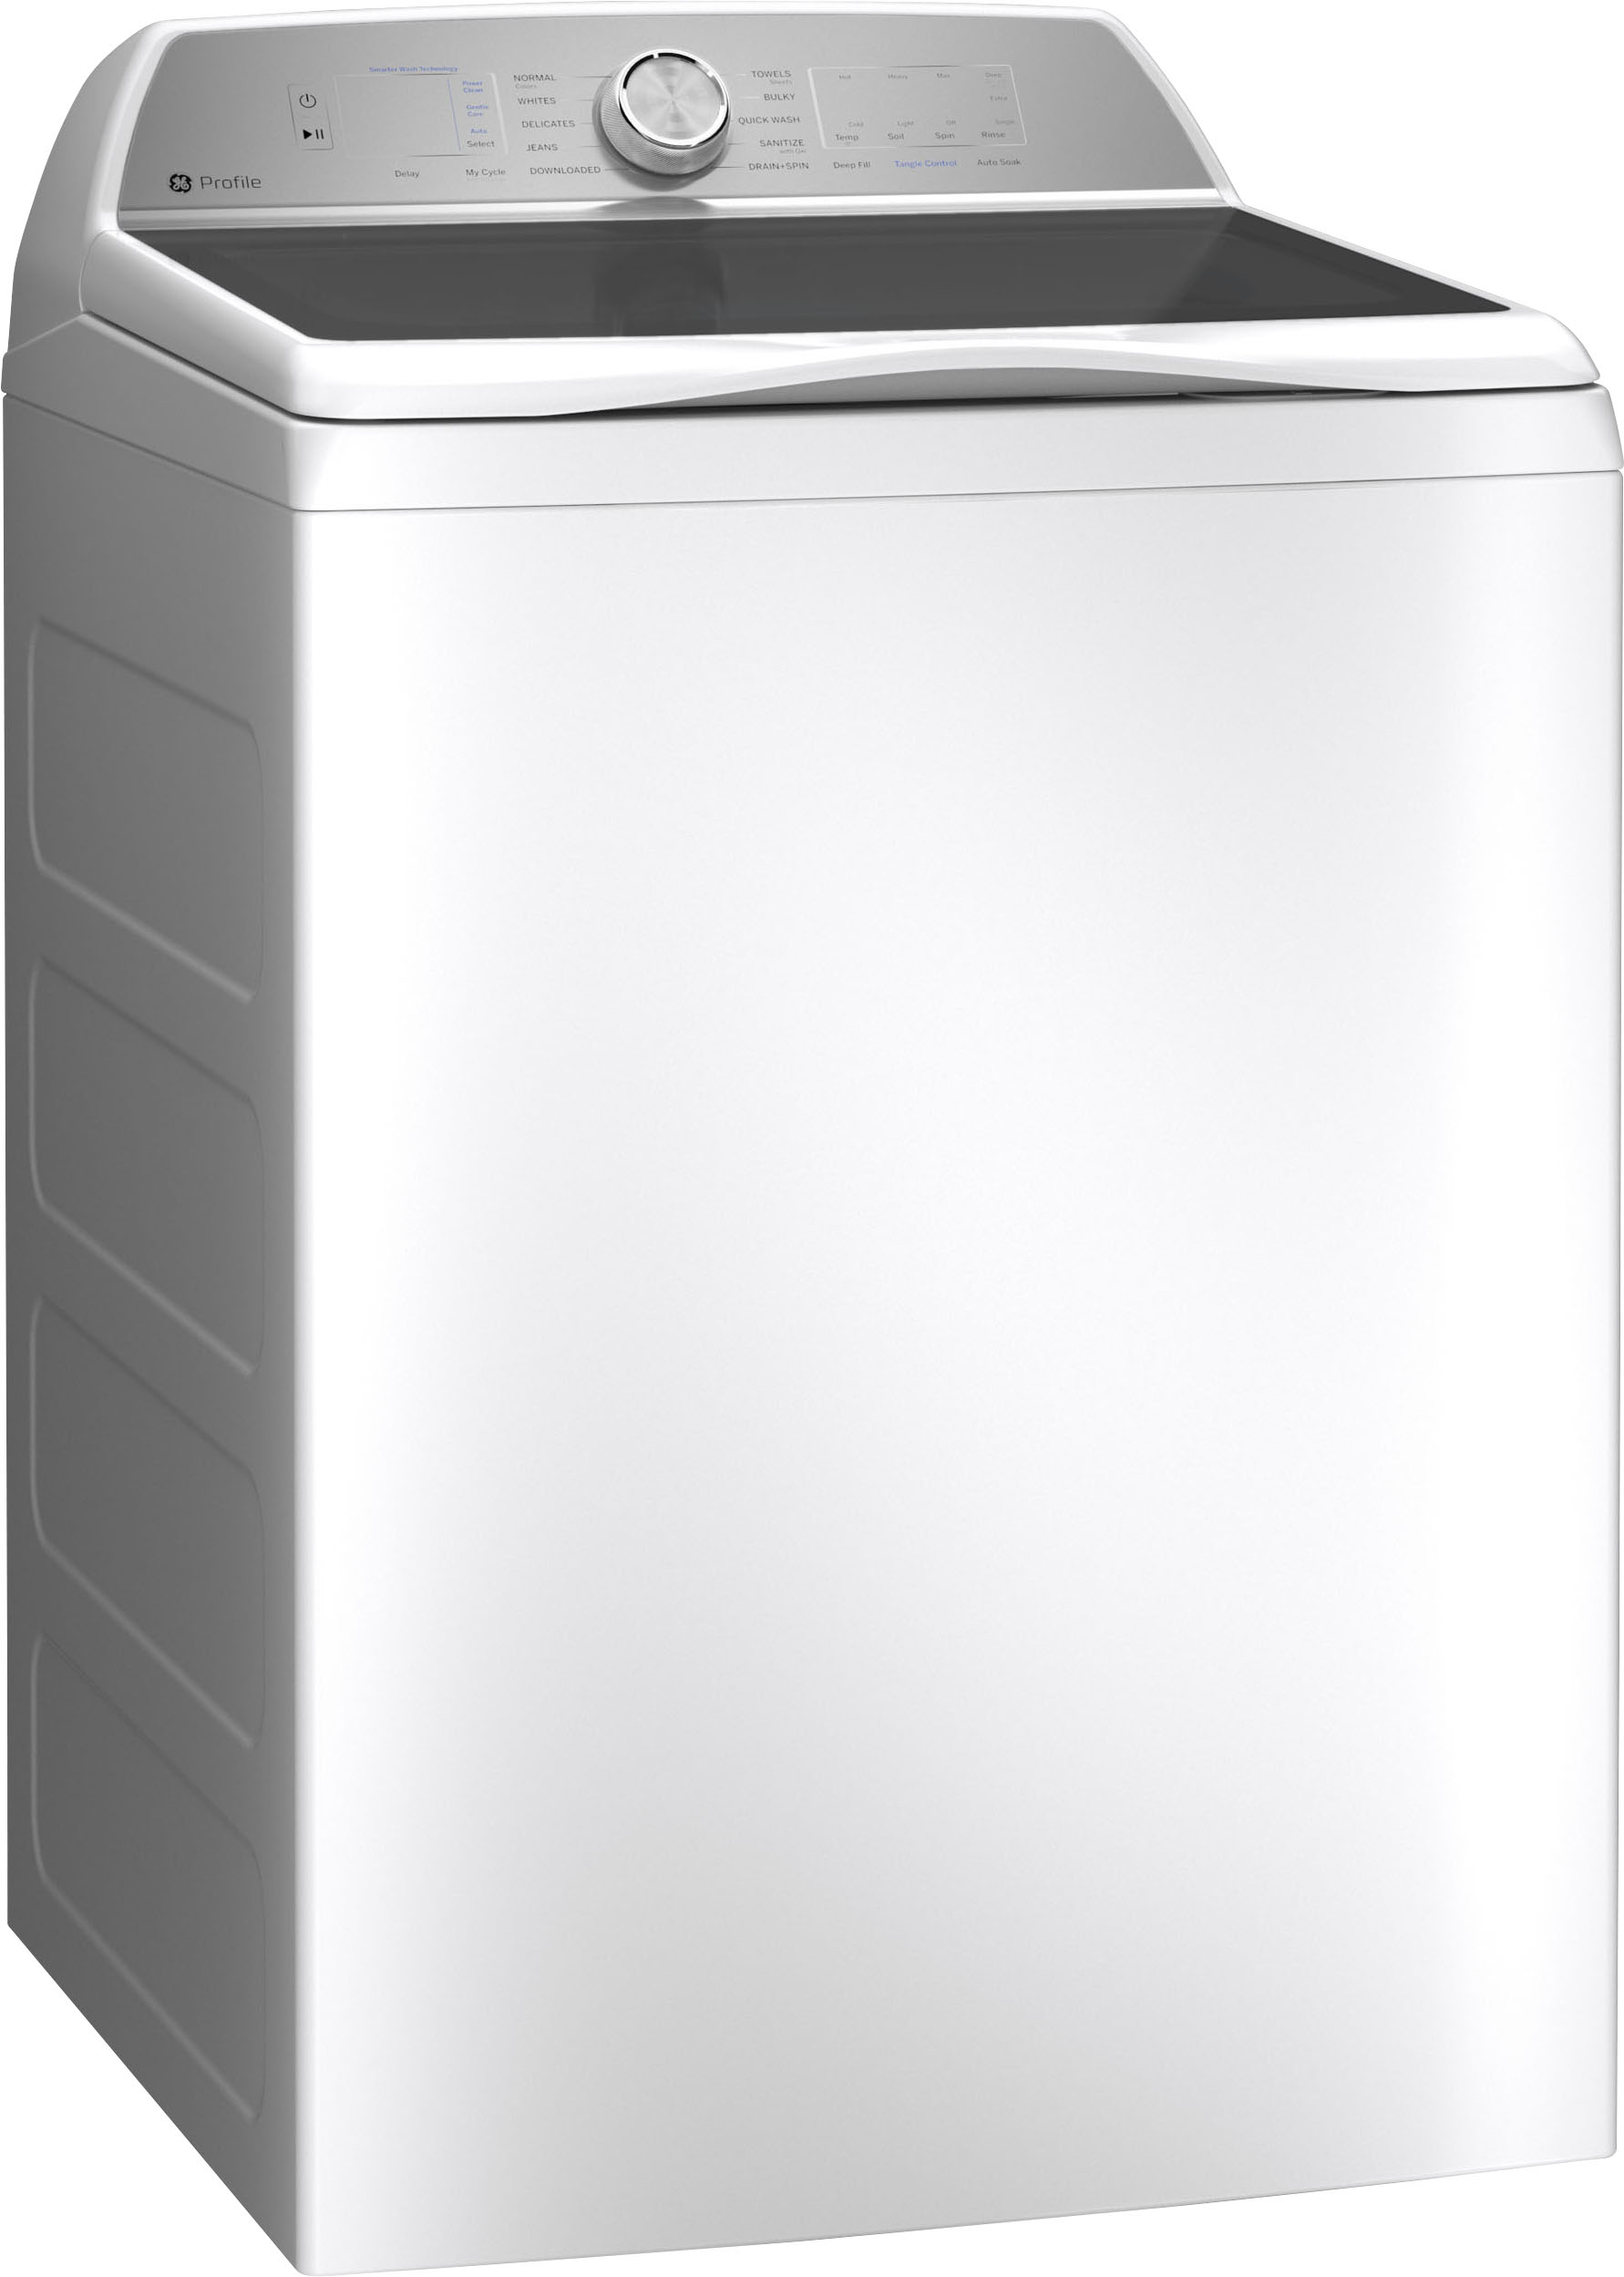 Angle View: GE Profile - 4.9 Cu Ft High Efficiency Smart Top Load Washer with Smarter Wash Technology, Easier Reach & Microban Technology - White